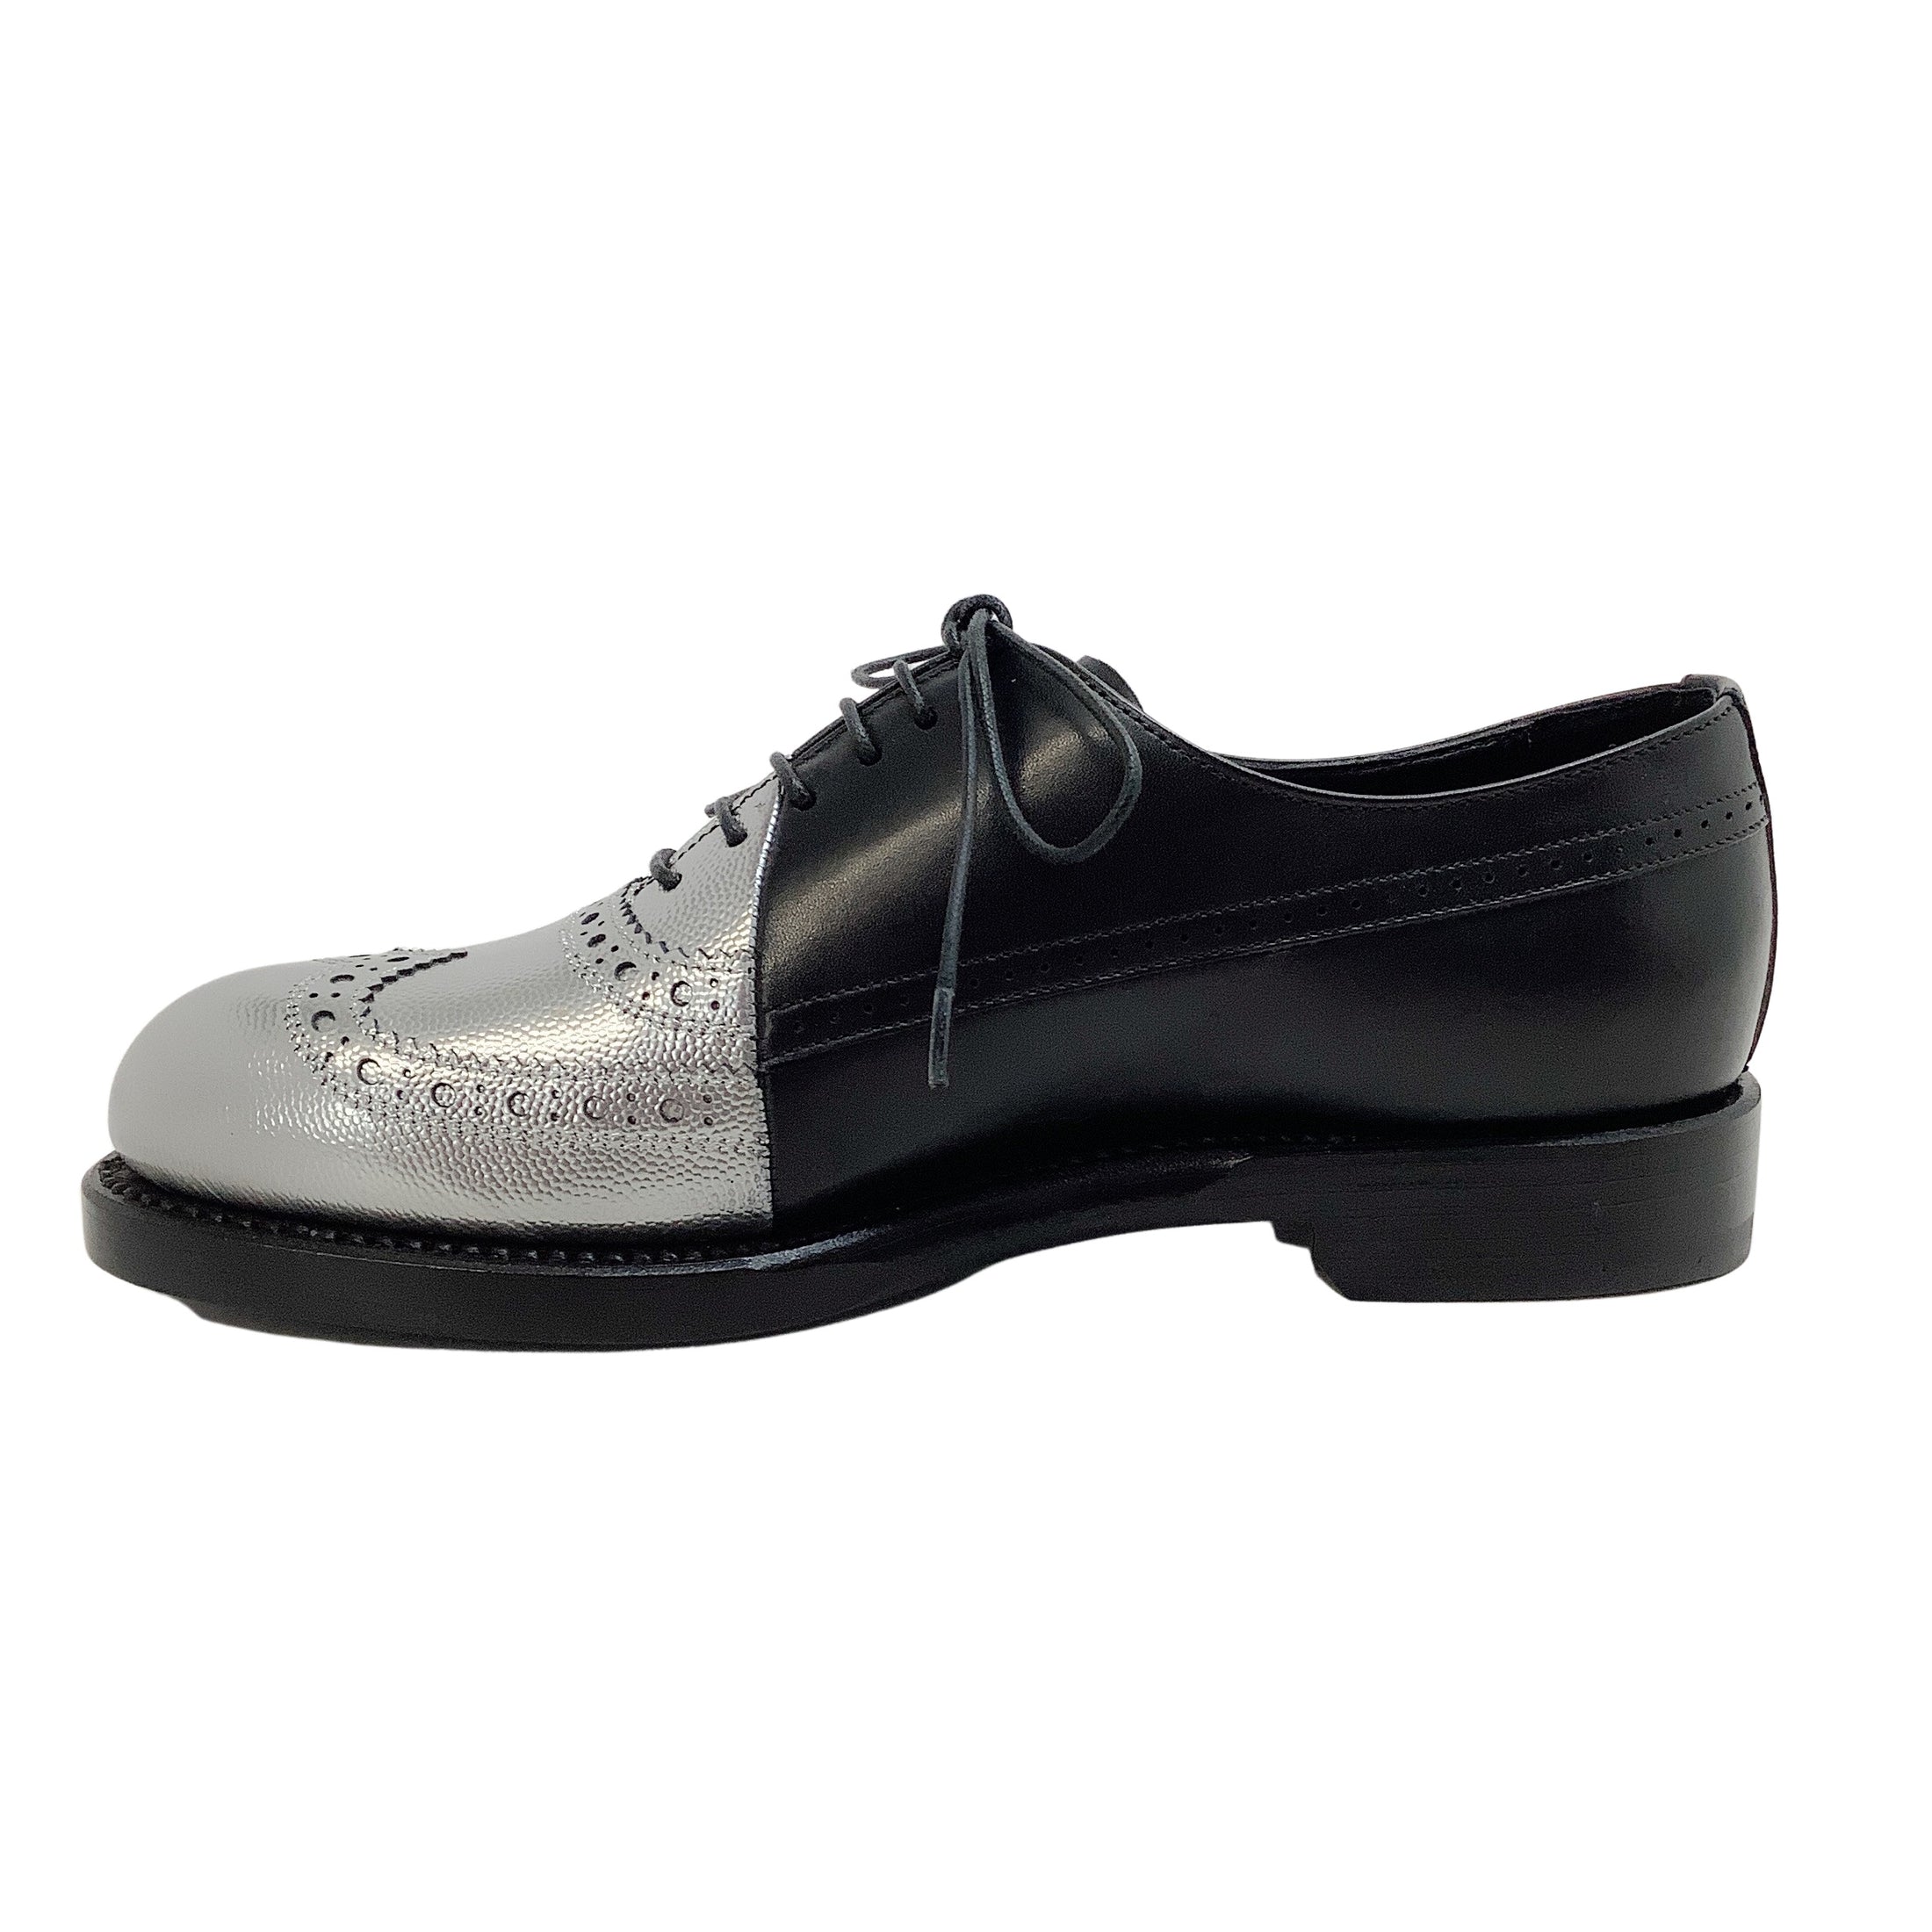 Pierre Hardy Silver / Black Brogue Wing Tip Oxfords